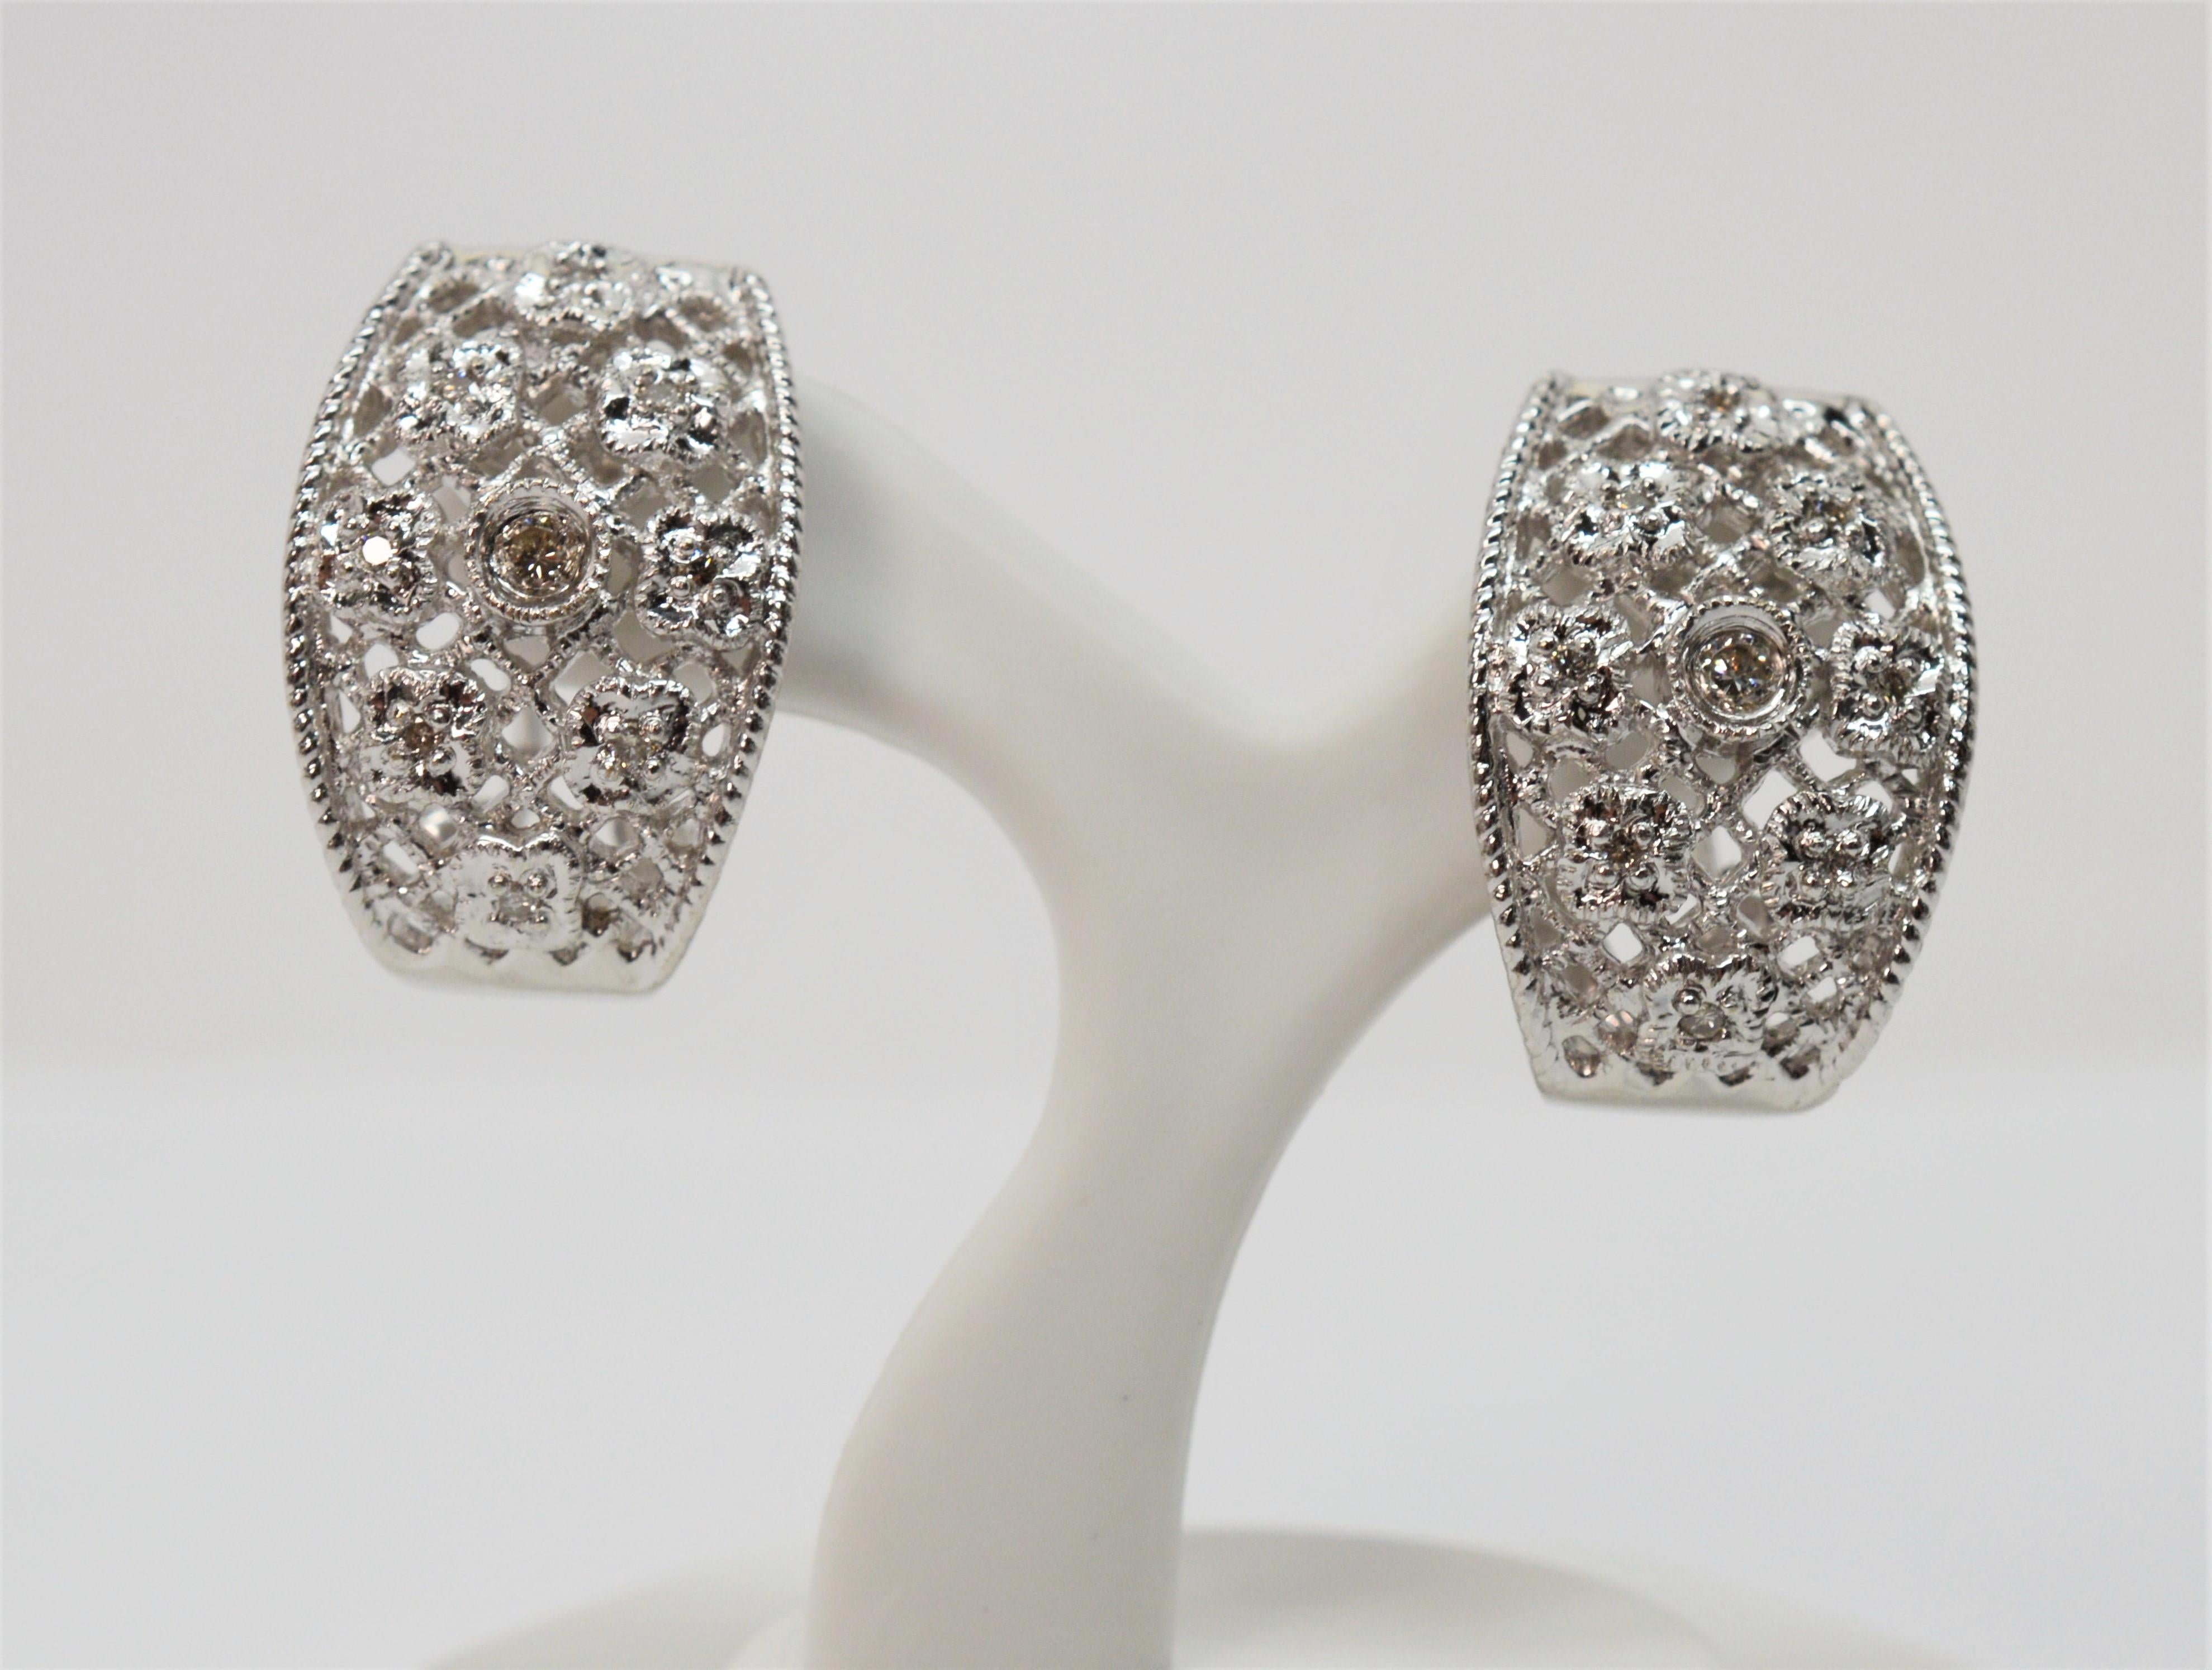 Fanciful, these tasteful eighteen karat 18k white gold lattice filigree wide oval hoop earrings sparkle with faceted round diamond accents. Made for pierced ears with post backs and an omega closure, they measure approximately 3/4 inches long and